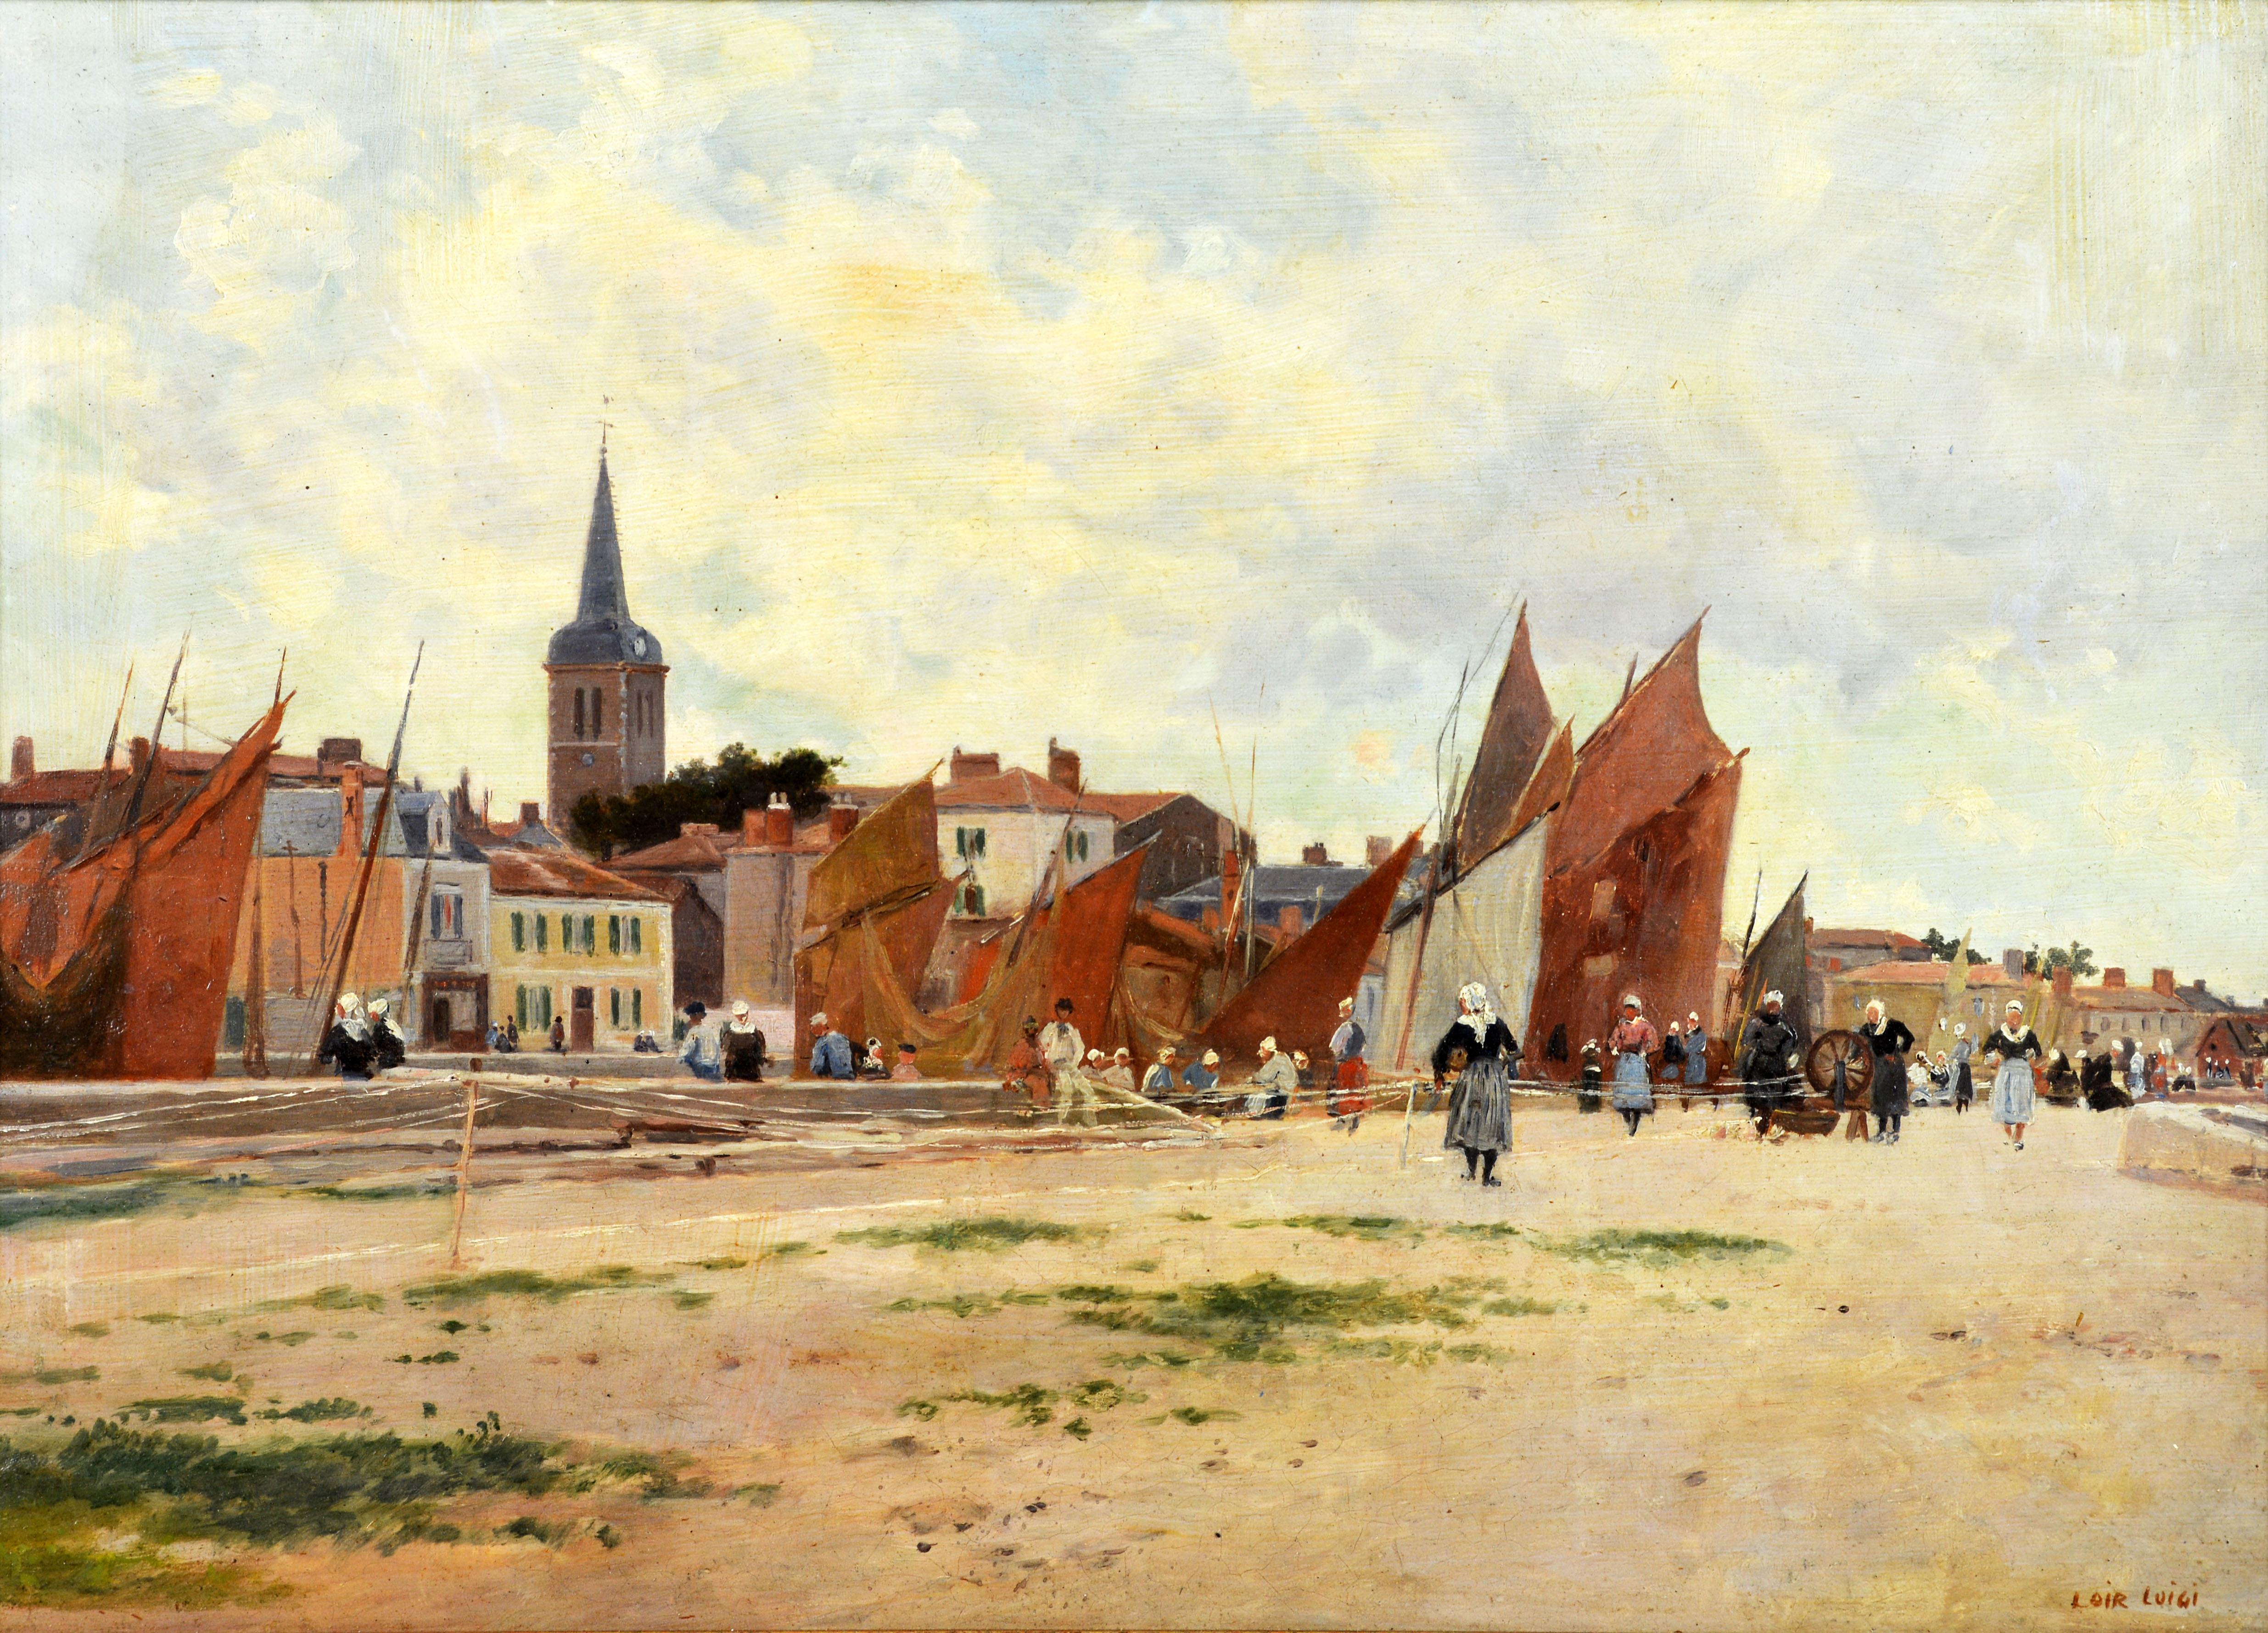 'Harbor Scene, Brittany'
By Luigi Loir, Austrian/French 1845-1916.
Measures: 15 x 21.5 in. without frame, 23 x 28.5 including frame.
Oil on panel. Signed in lower right corner.
Housed in a gilt paint antique frame.

Luigi Loir:
Luigi Loir was